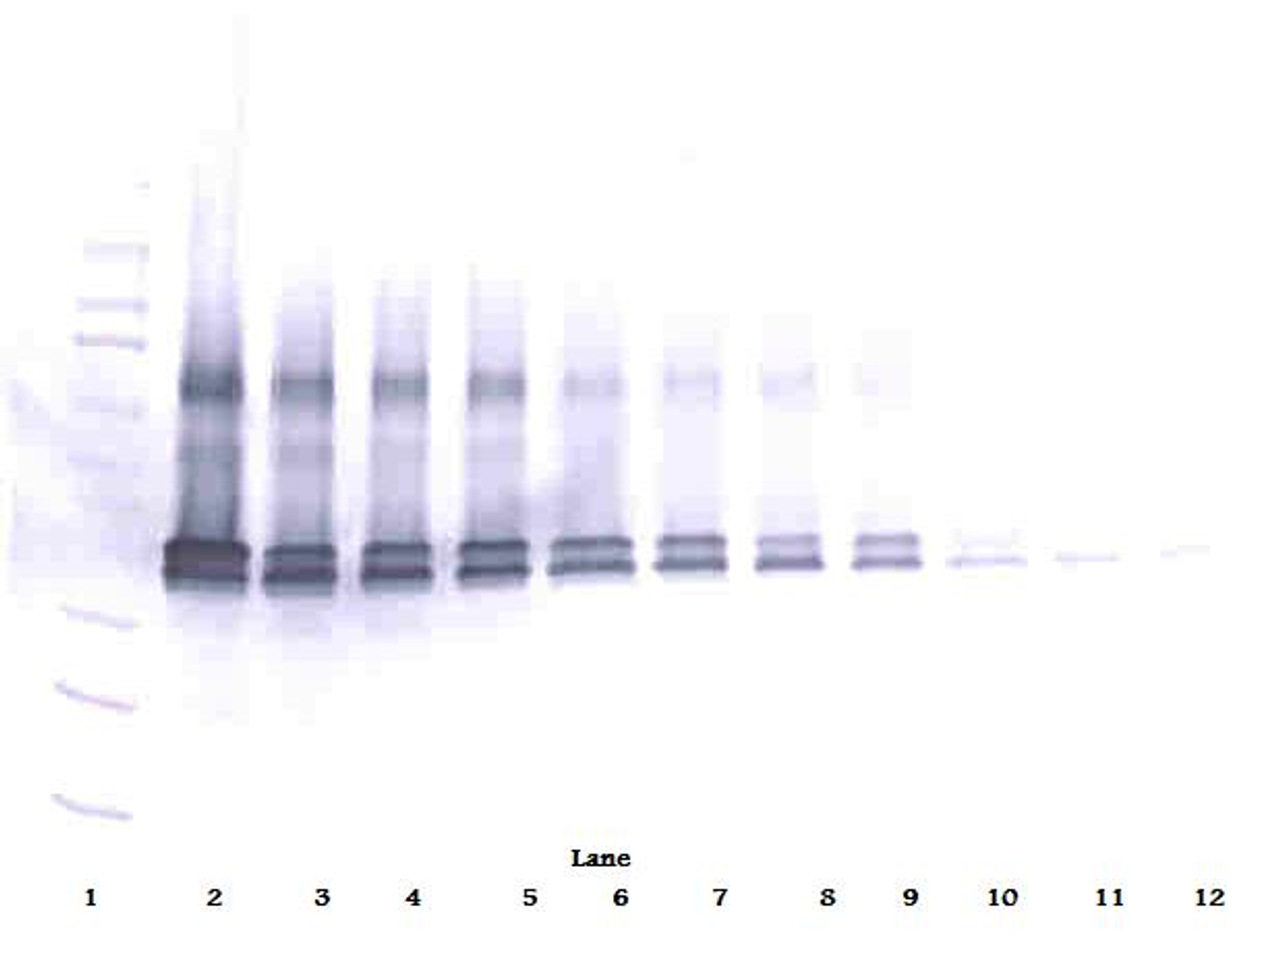 To detect mVEGF by Western Blot analysis this antibody can be used at a concentration of 0.1-0.2 ug/ml. Used in conjunction with compatible secondary reagents the detection limit for recombinant mVEGF is 1.5-3.0 ng/lane, under either reducing or non-reducing conditions.